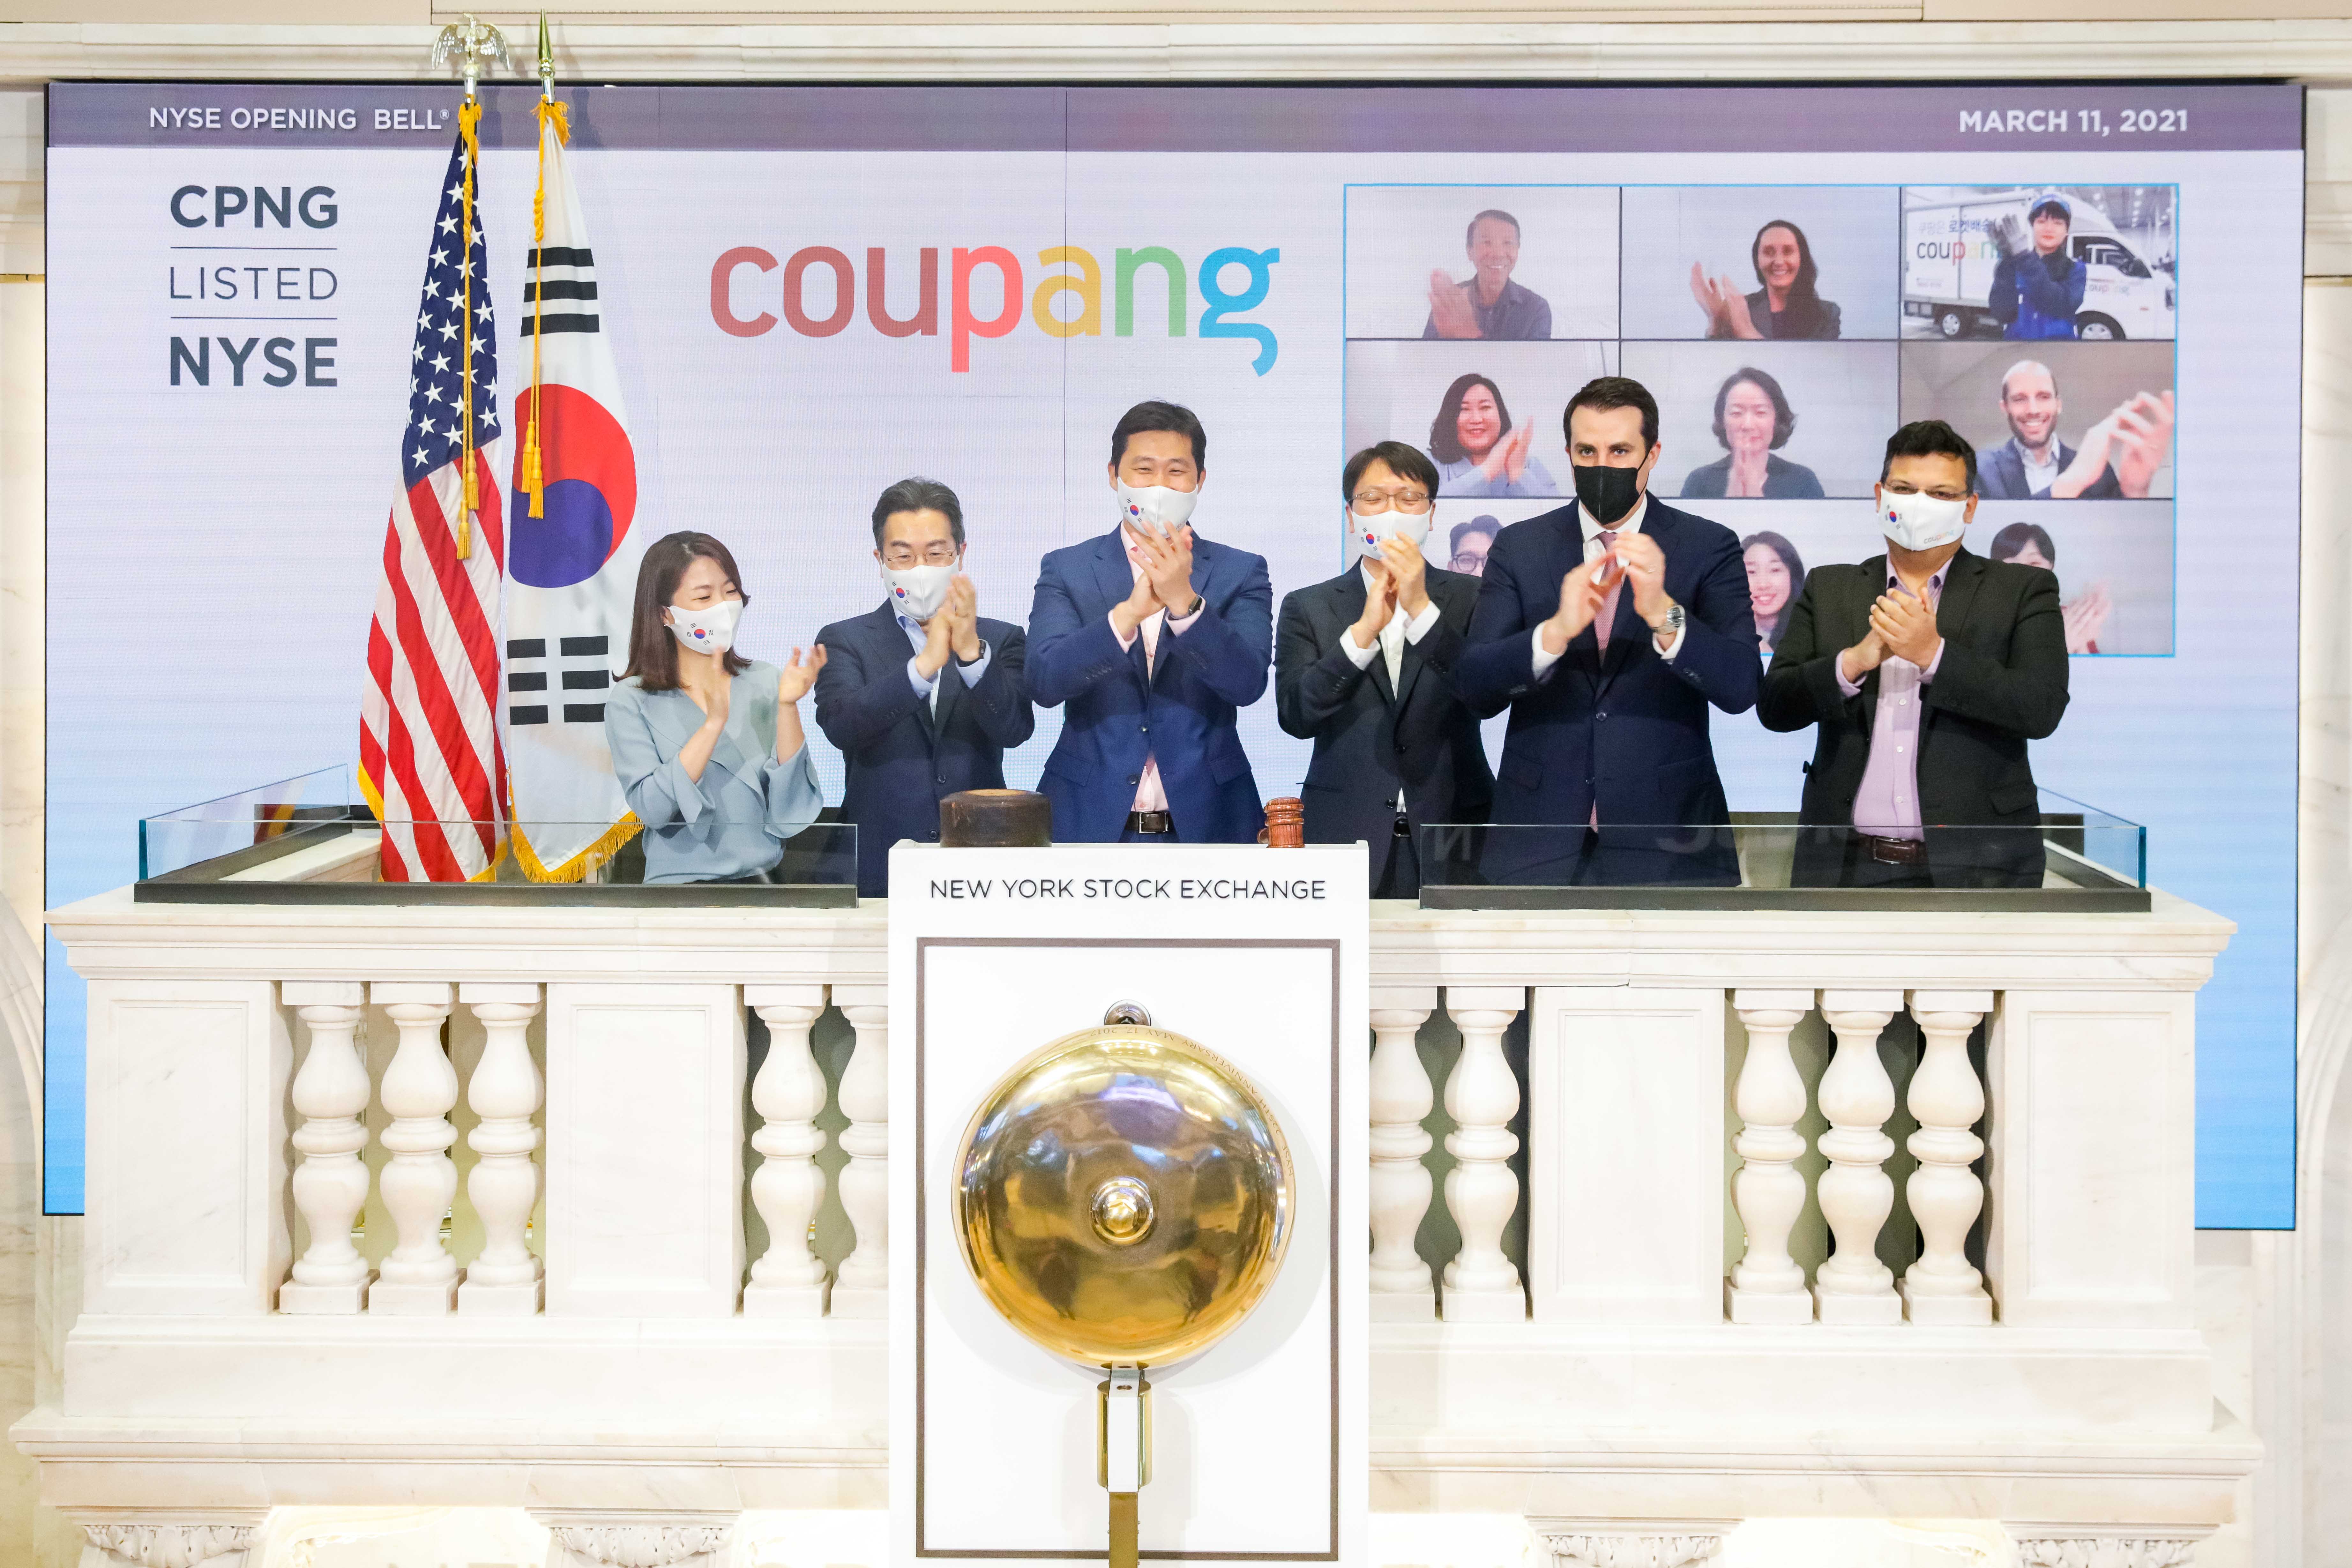 CPNG begins trading on the NYSE